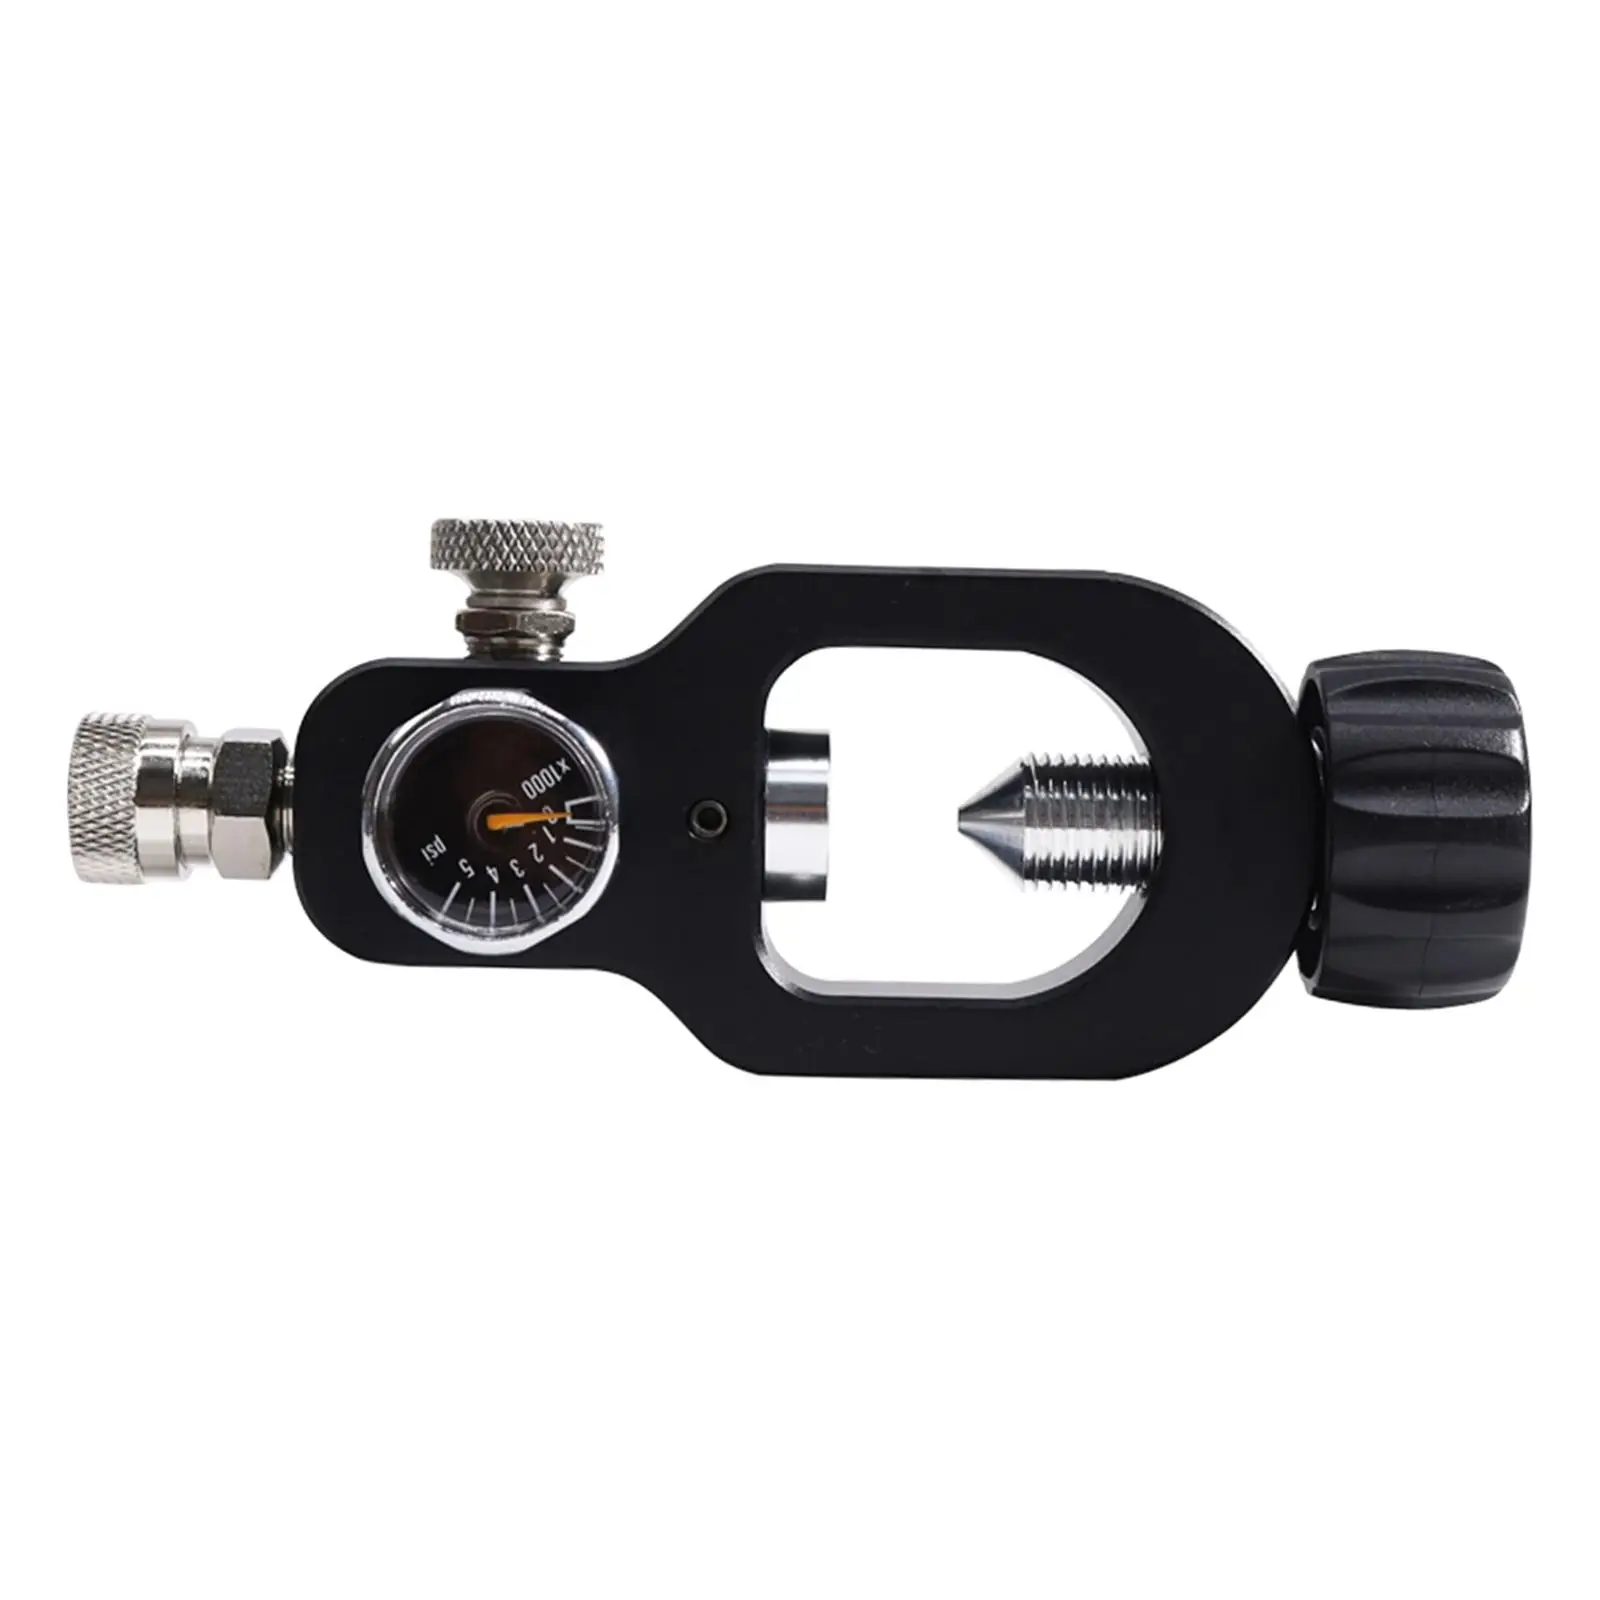 Diving Tank Refill Adapter Diving Oxygen Refill Adapter Anti Rust 5000PSI with Gauge Valve Scuba Adapter for Diving Equipment